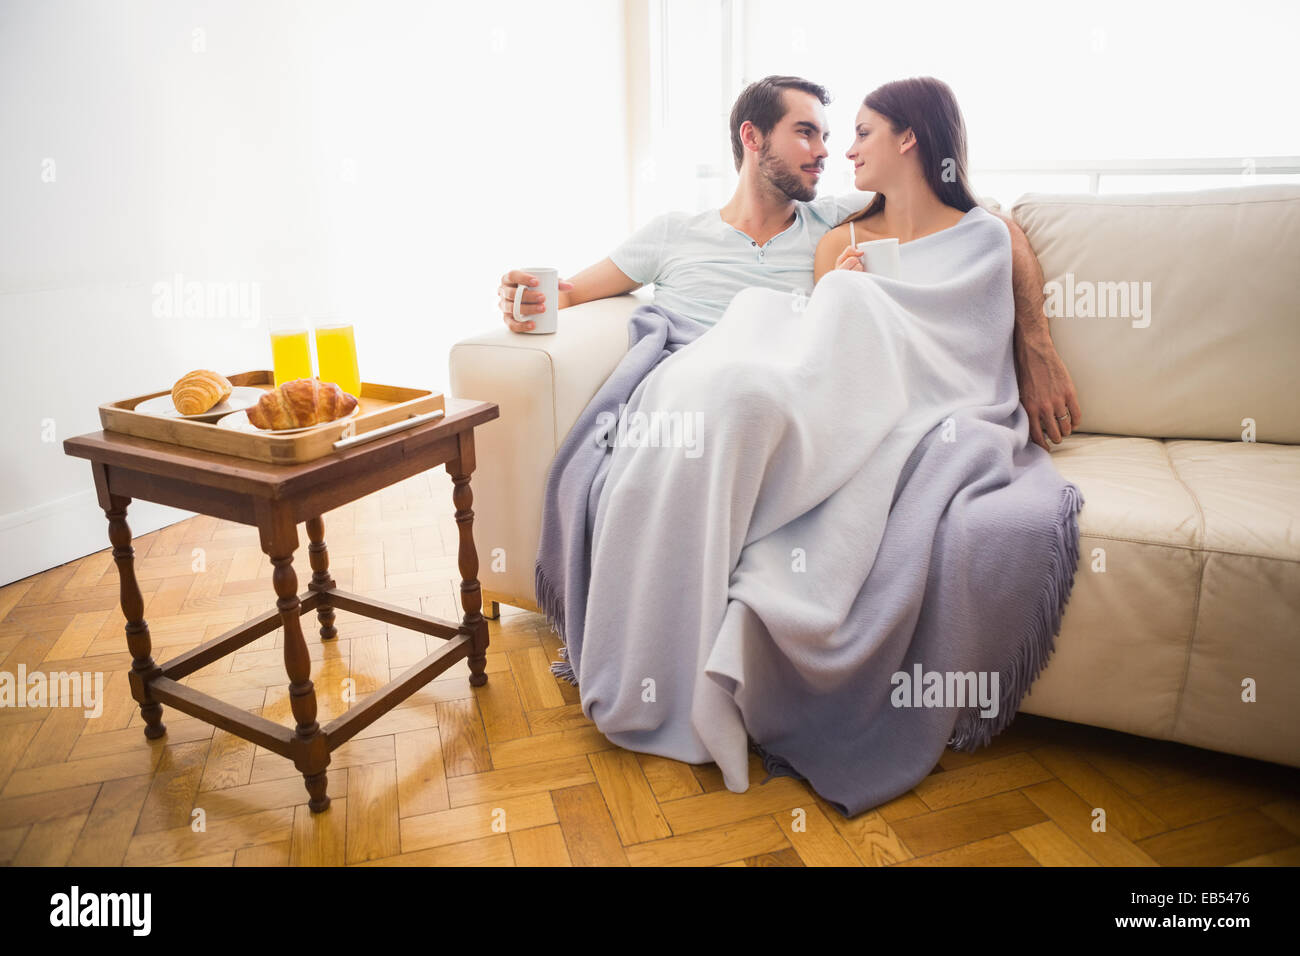 Cute couple relaxing on couch sous couverture Banque D'Images